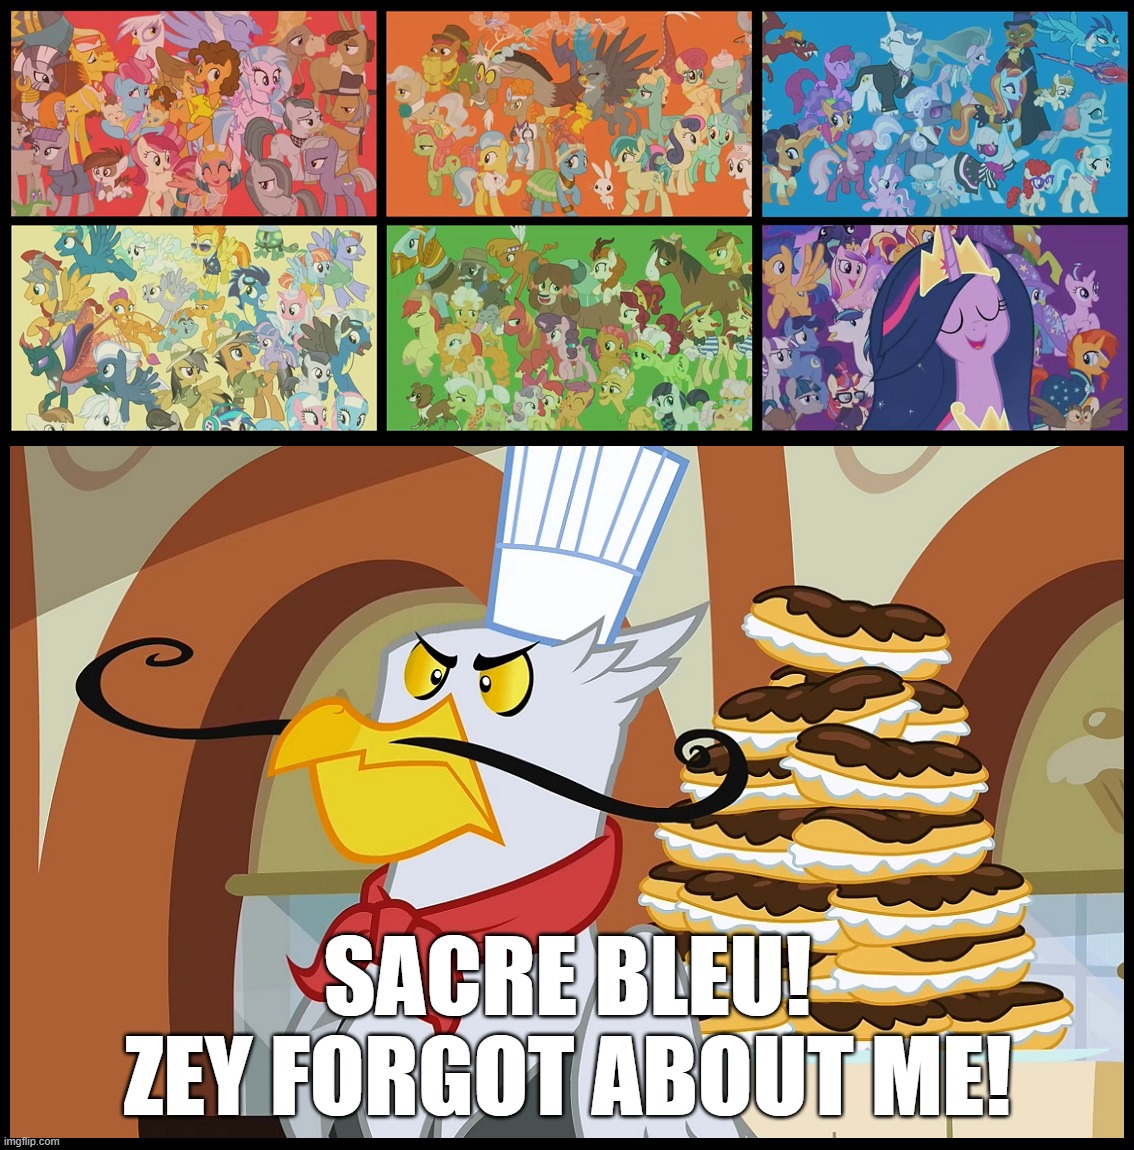 Zey Forgot About Gustave Le Grand! | SACRE BLEU!
ZEY FORGOT ABOUT ME! | image tagged in my little pony,my little pony friendship is magic | made w/ Imgflip meme maker